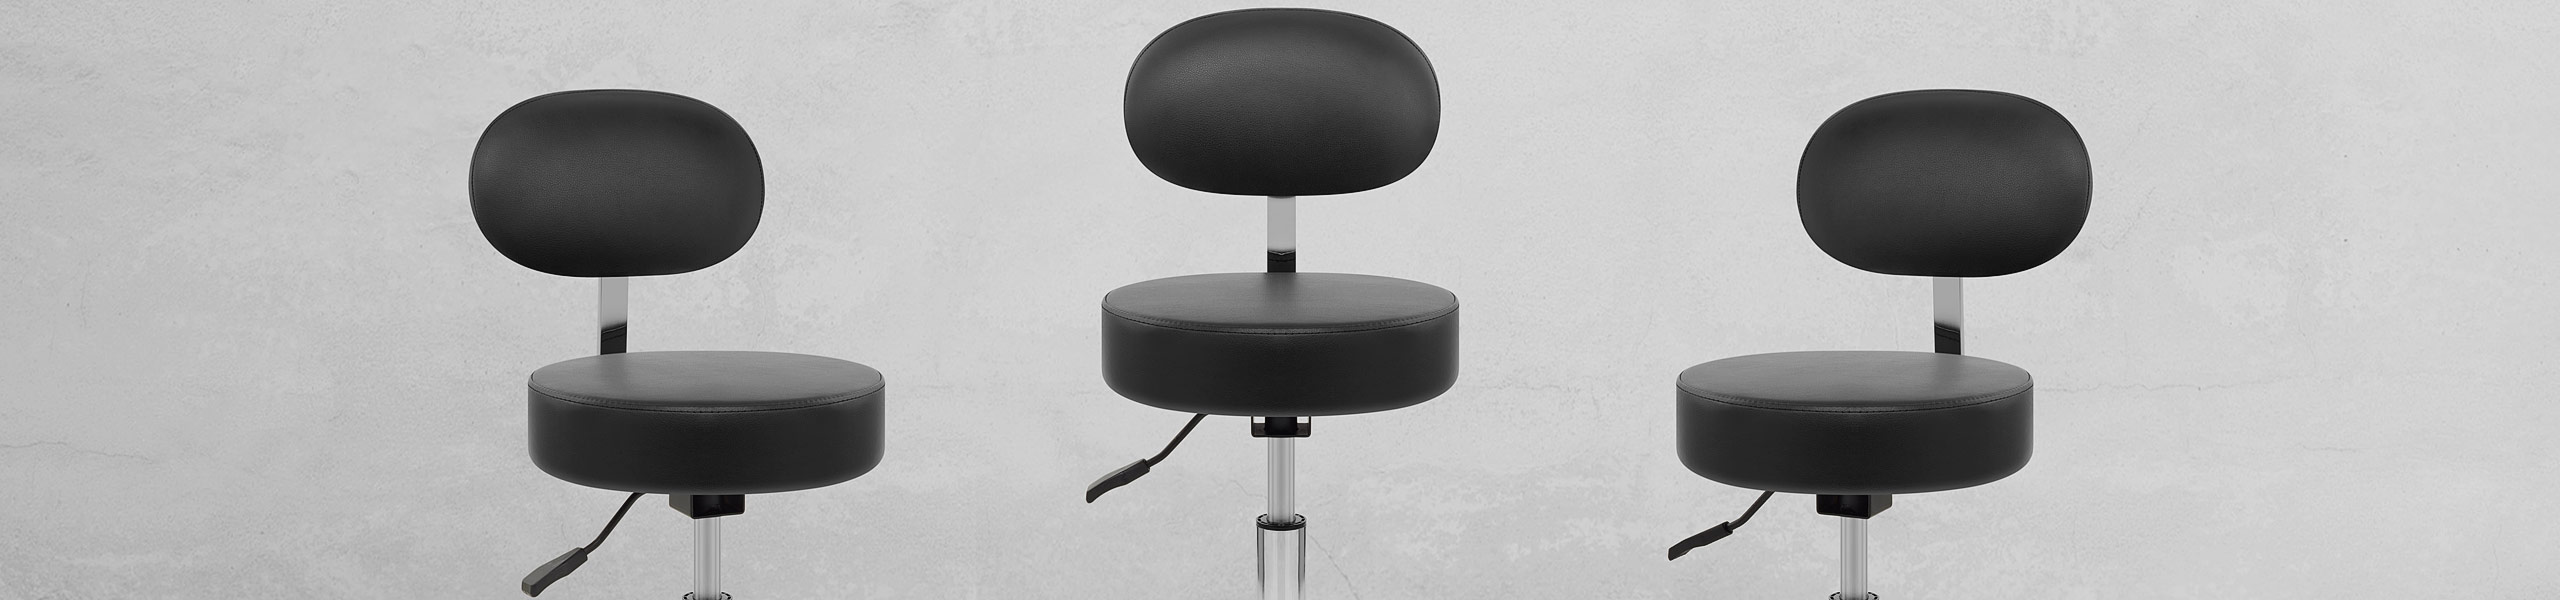 Swivel Stool With Back Black Video Banner